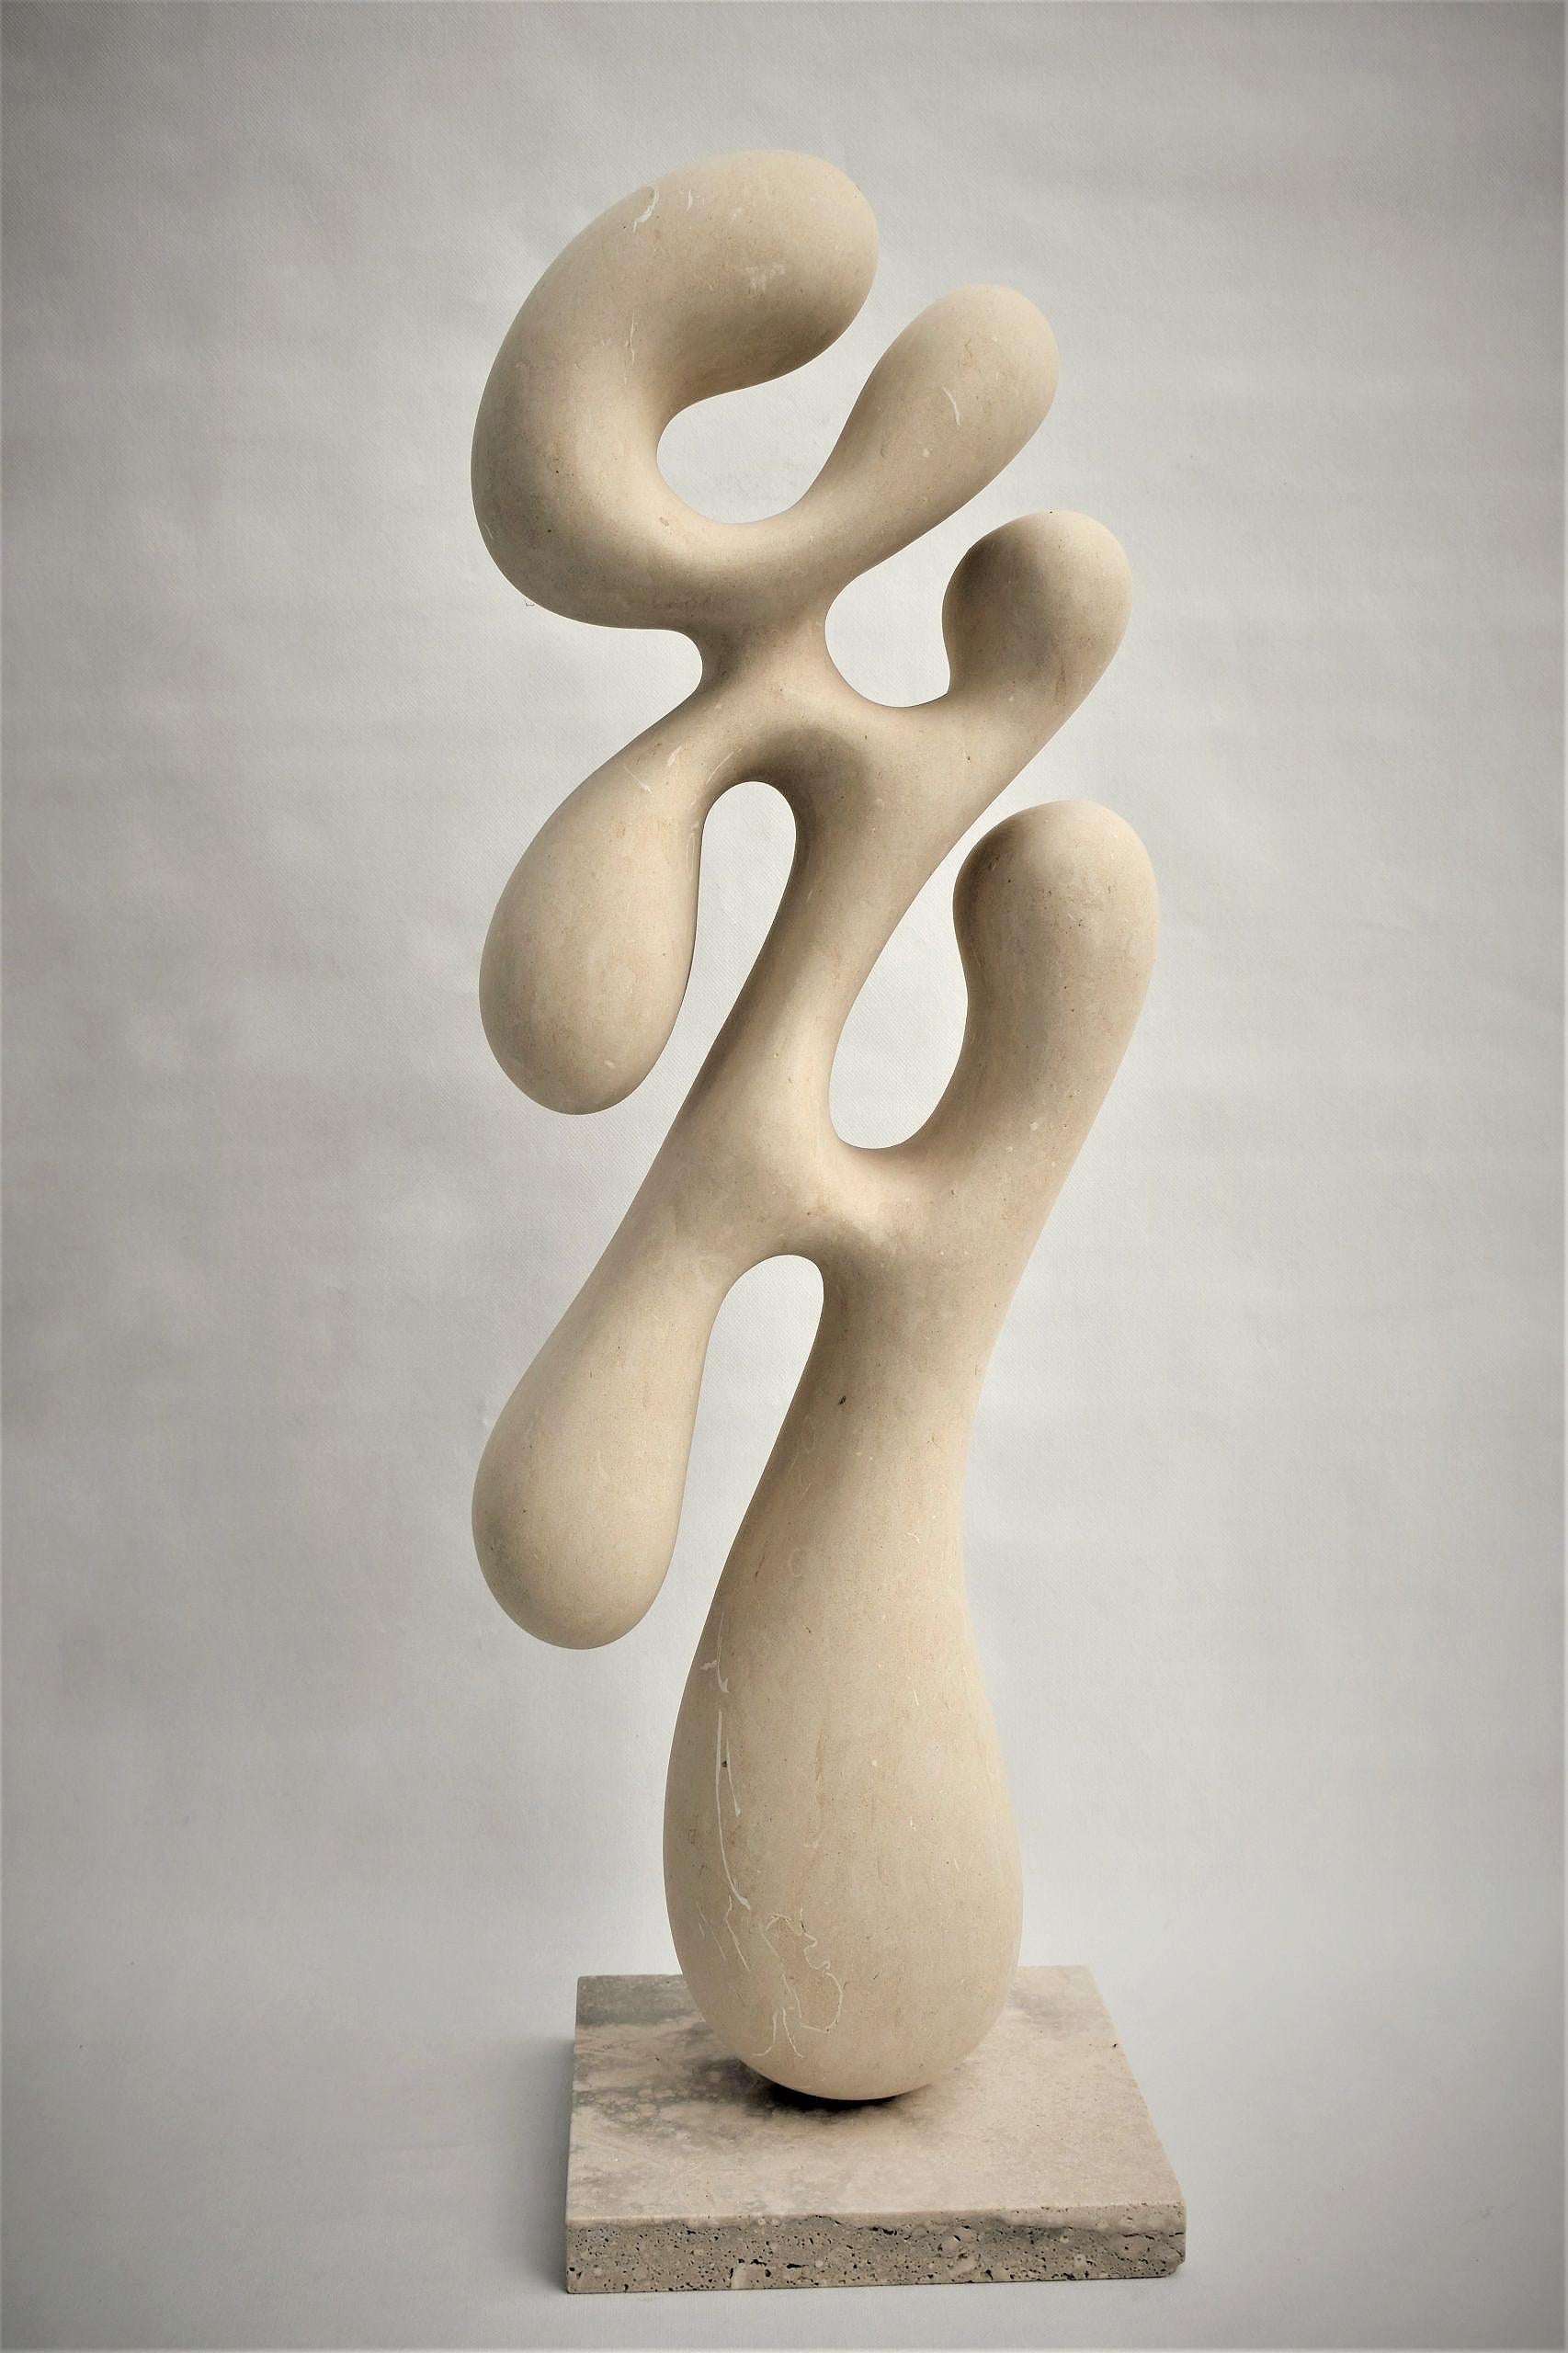 21st century abstract sculpture BLOG by Renzo Buttazzo from Italy

Sculpture in Lecce Stone
Delivered with a certificate of authenticity.

Since 1886 Renzo Buttazzo work with Pietra Leccese (limestone from Lecce), and during this time he combined